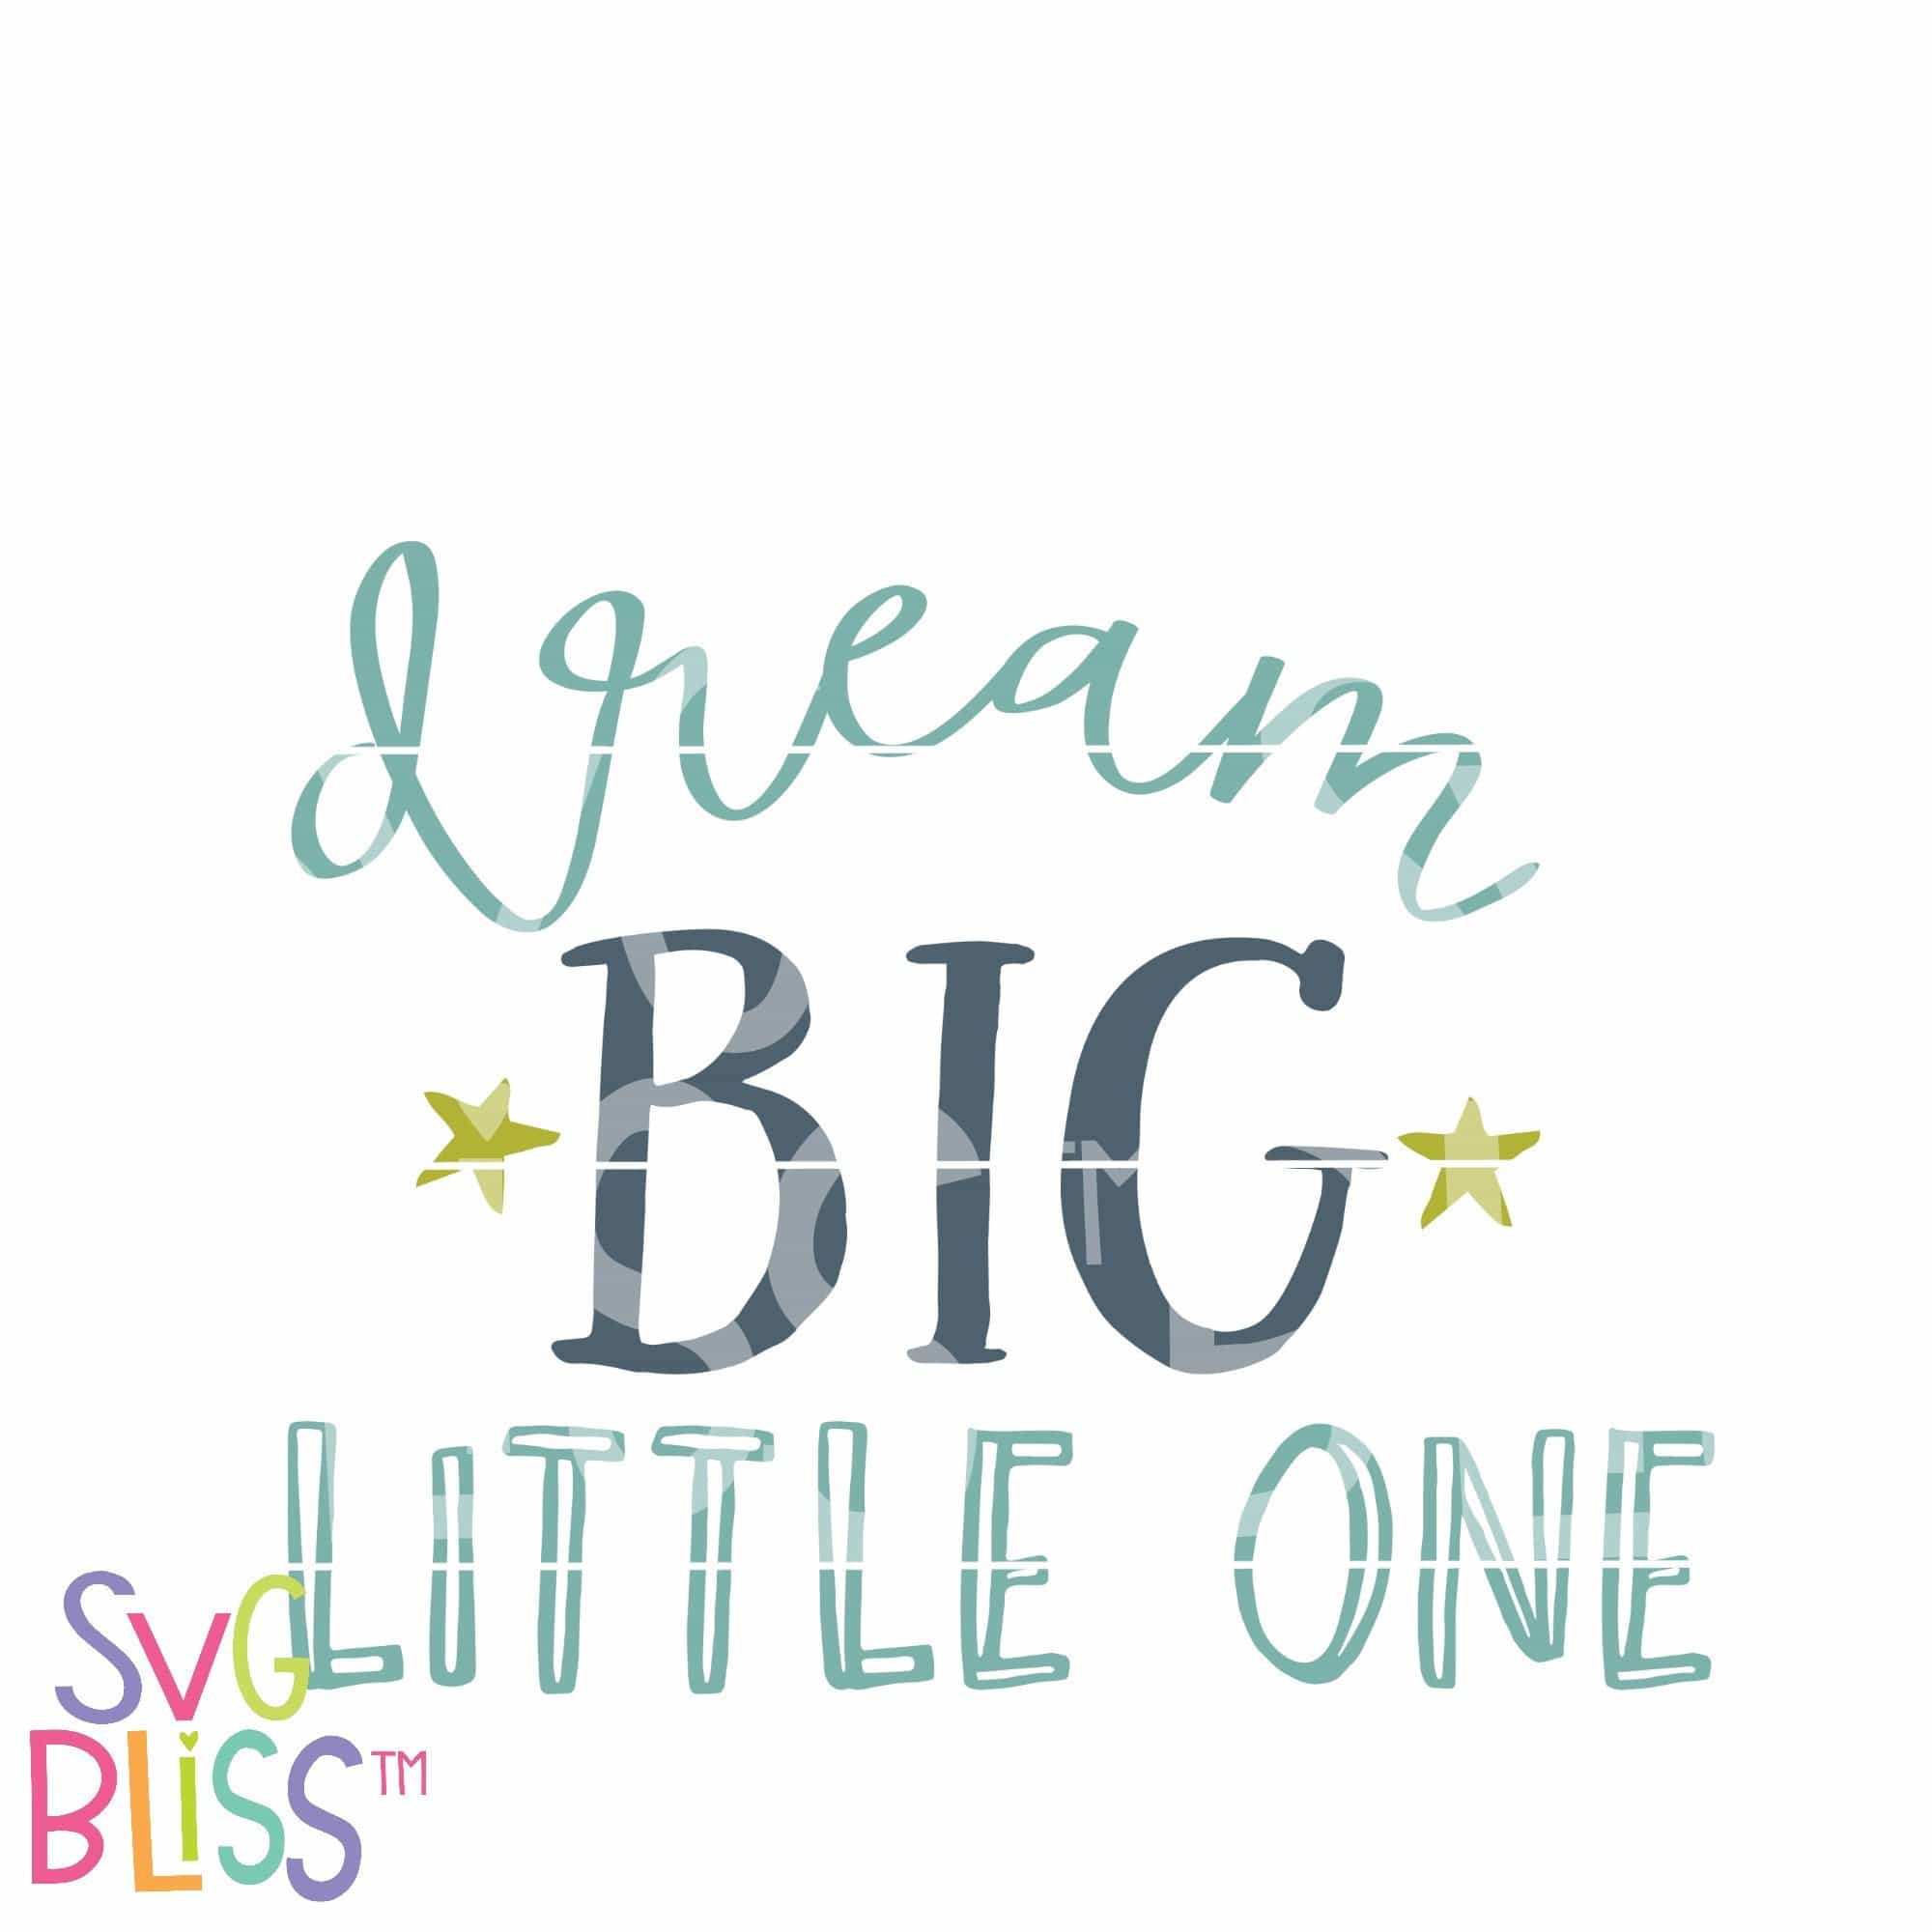 Download SVG Bliss™| Dream Big Little One